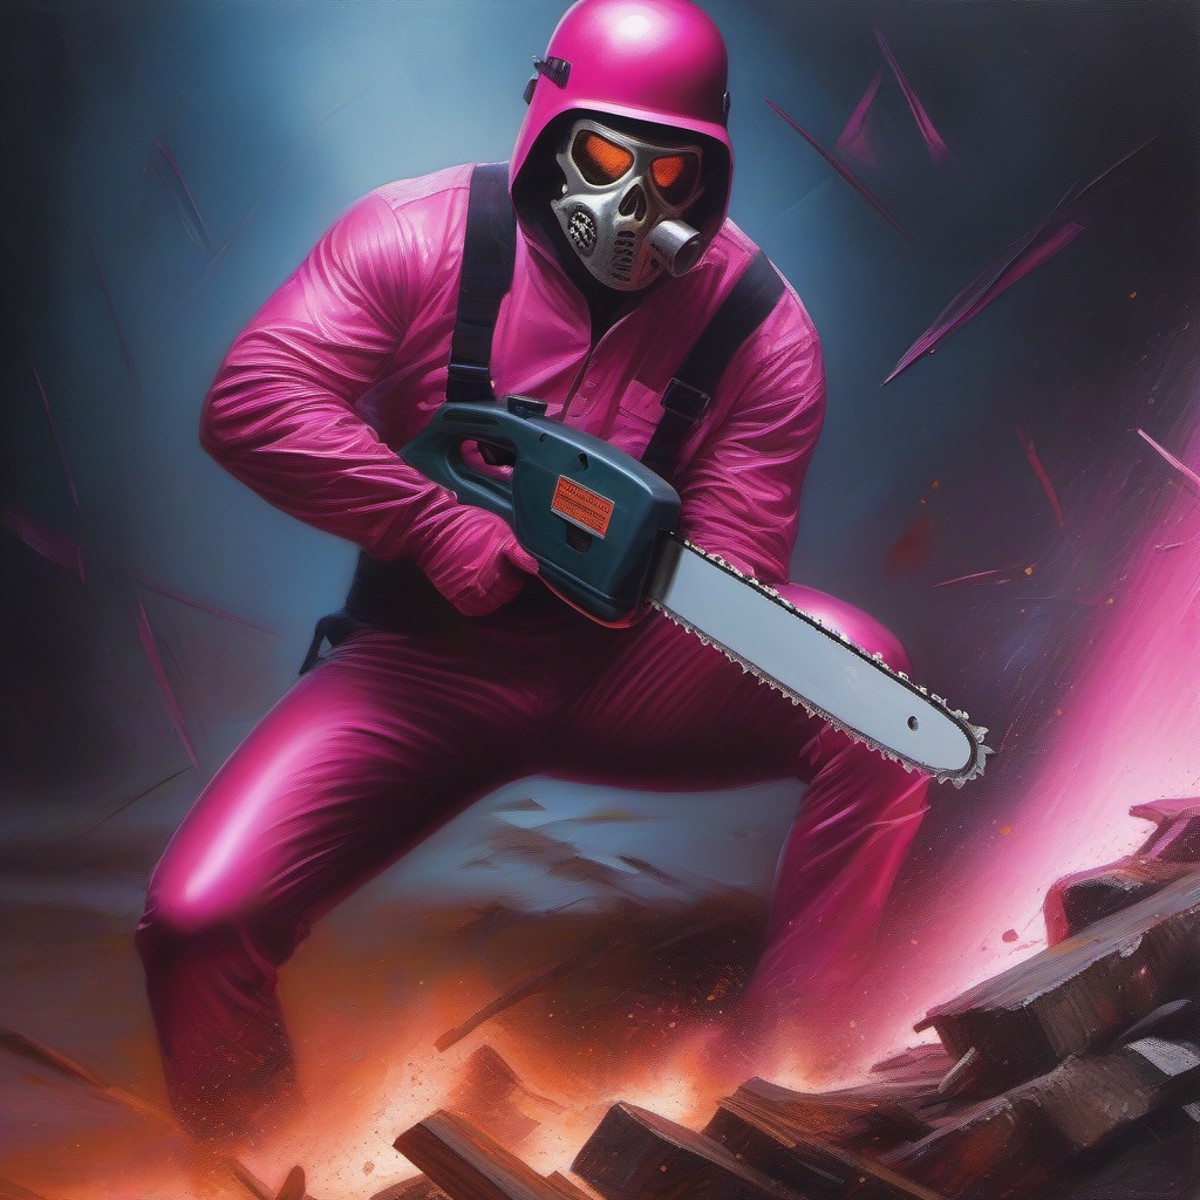 very tight suit, tight tights, a man in pink shiny glam tights wielding a chainsaw with both hands, death metal, art by gr...